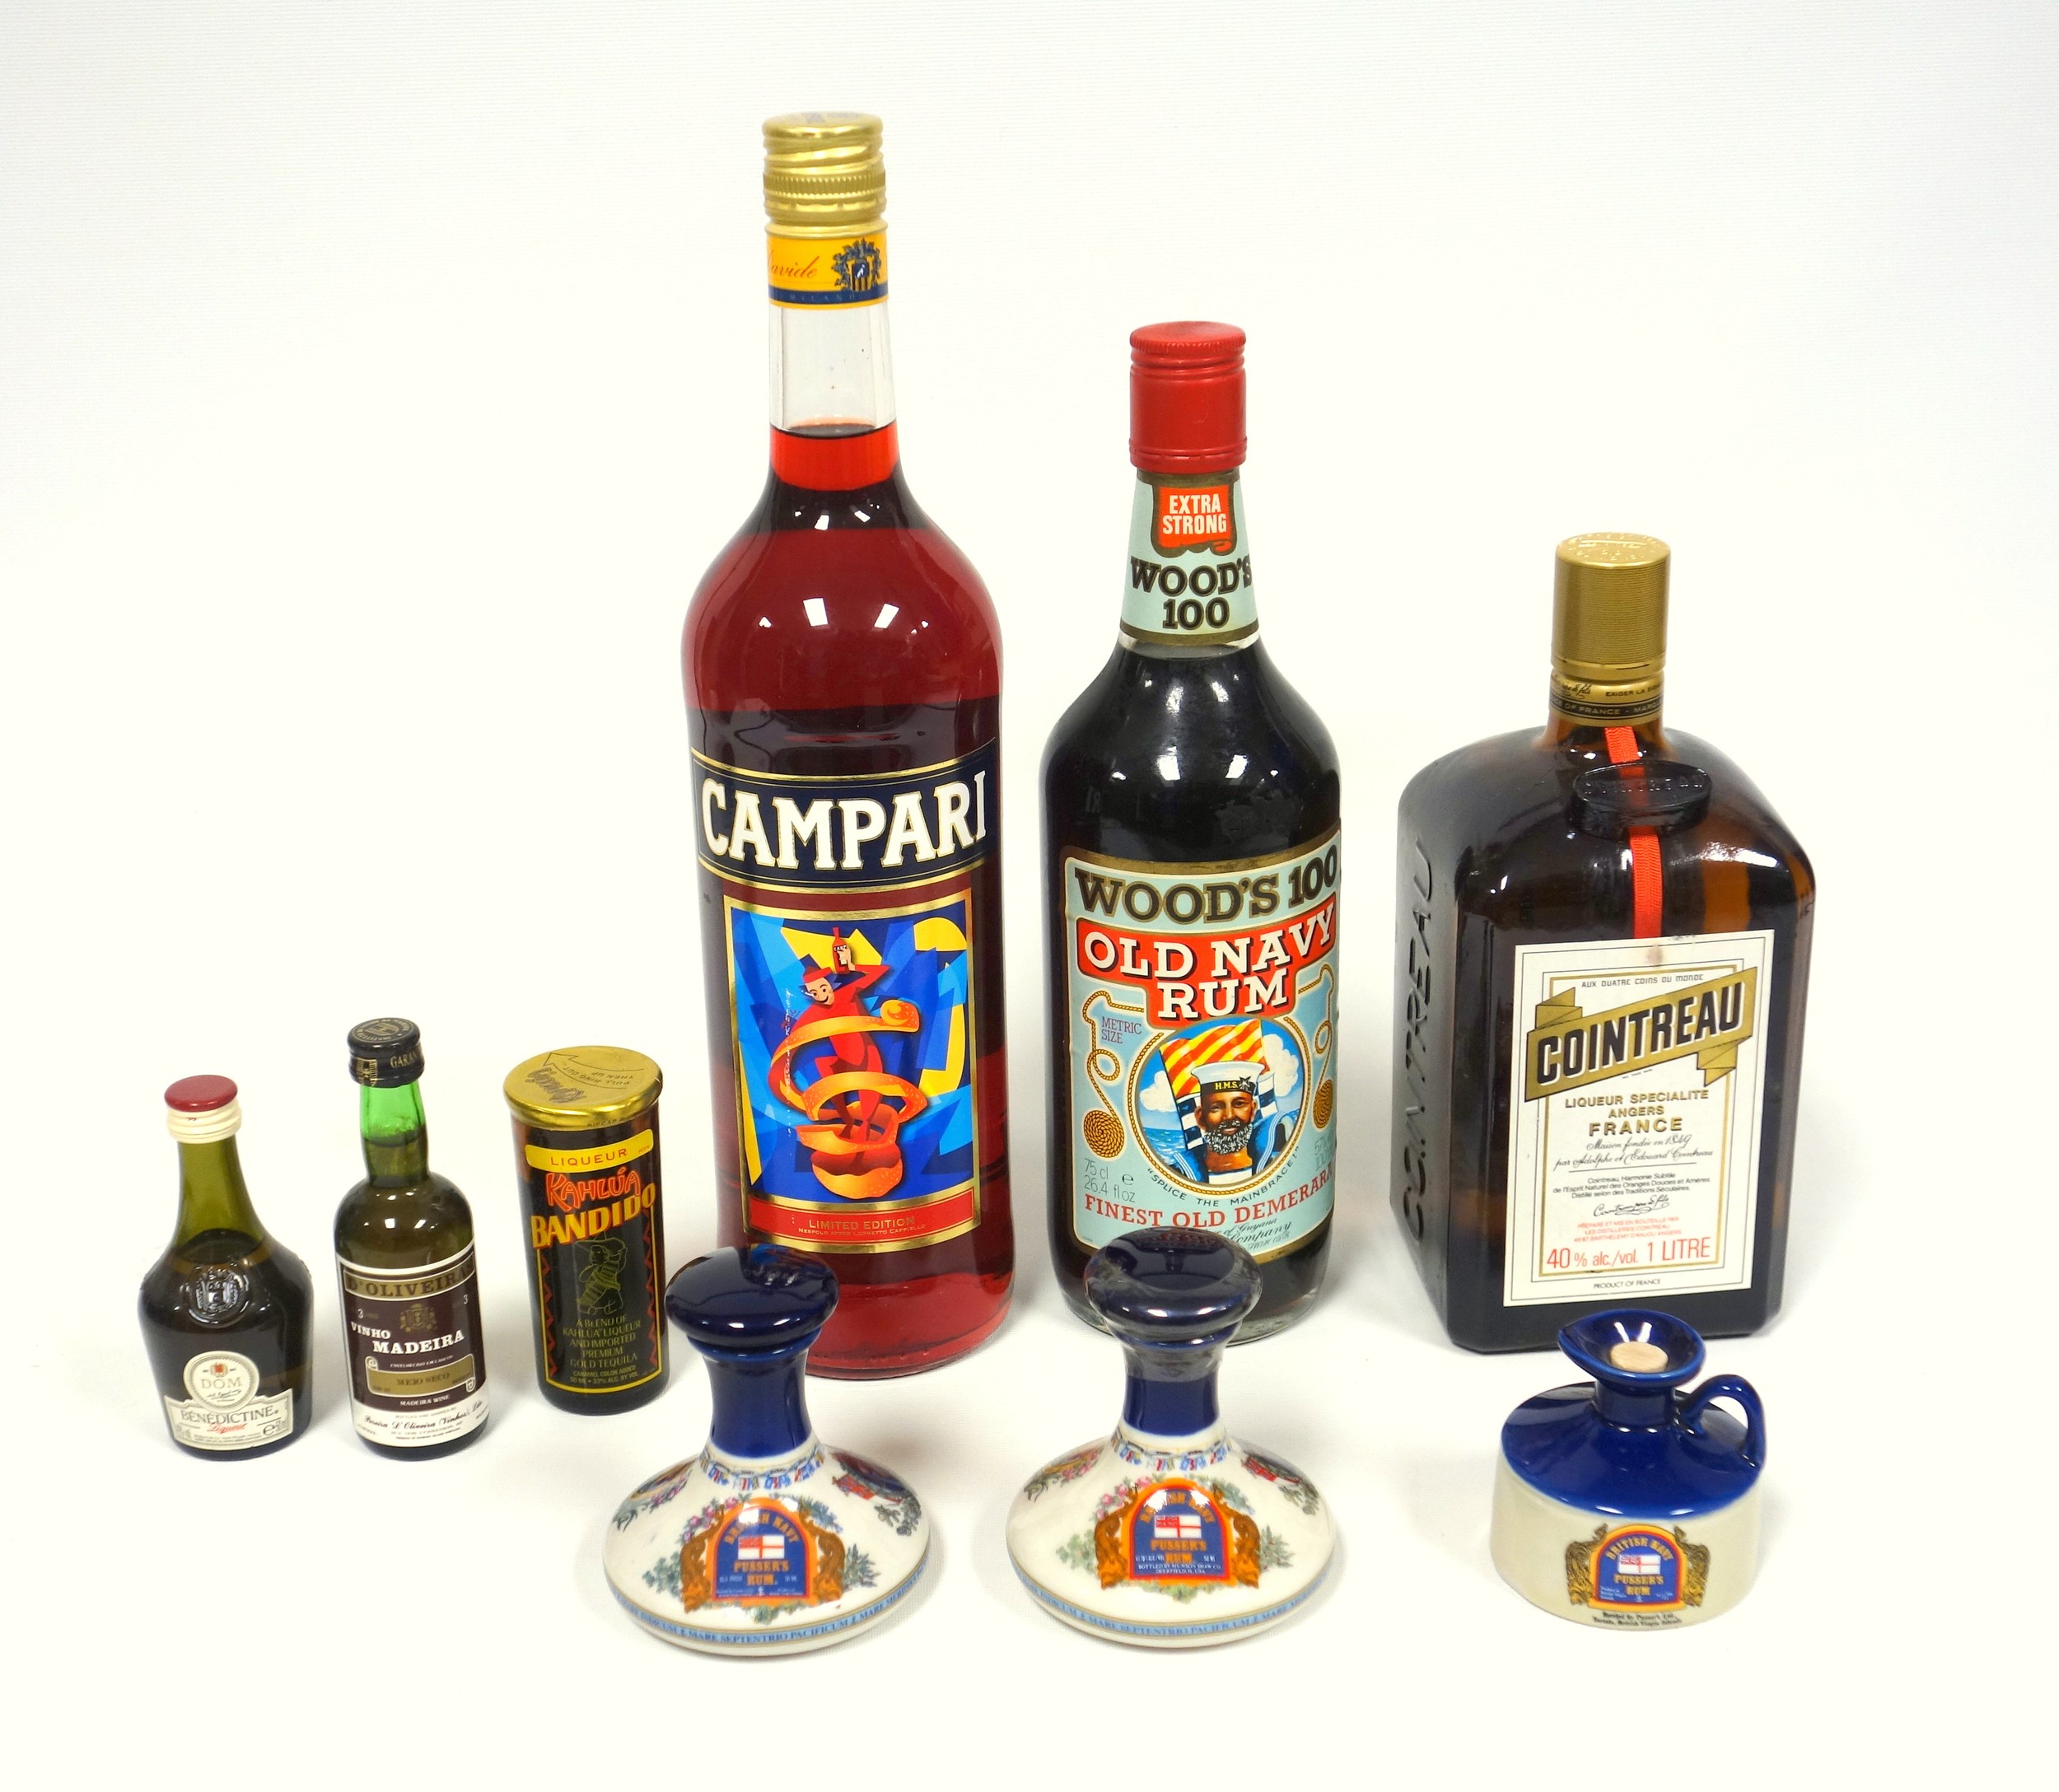 Bottle of Campari with limited edition art label by Ugo Nespolo after Leonetto Capiello, 2012, 1L,